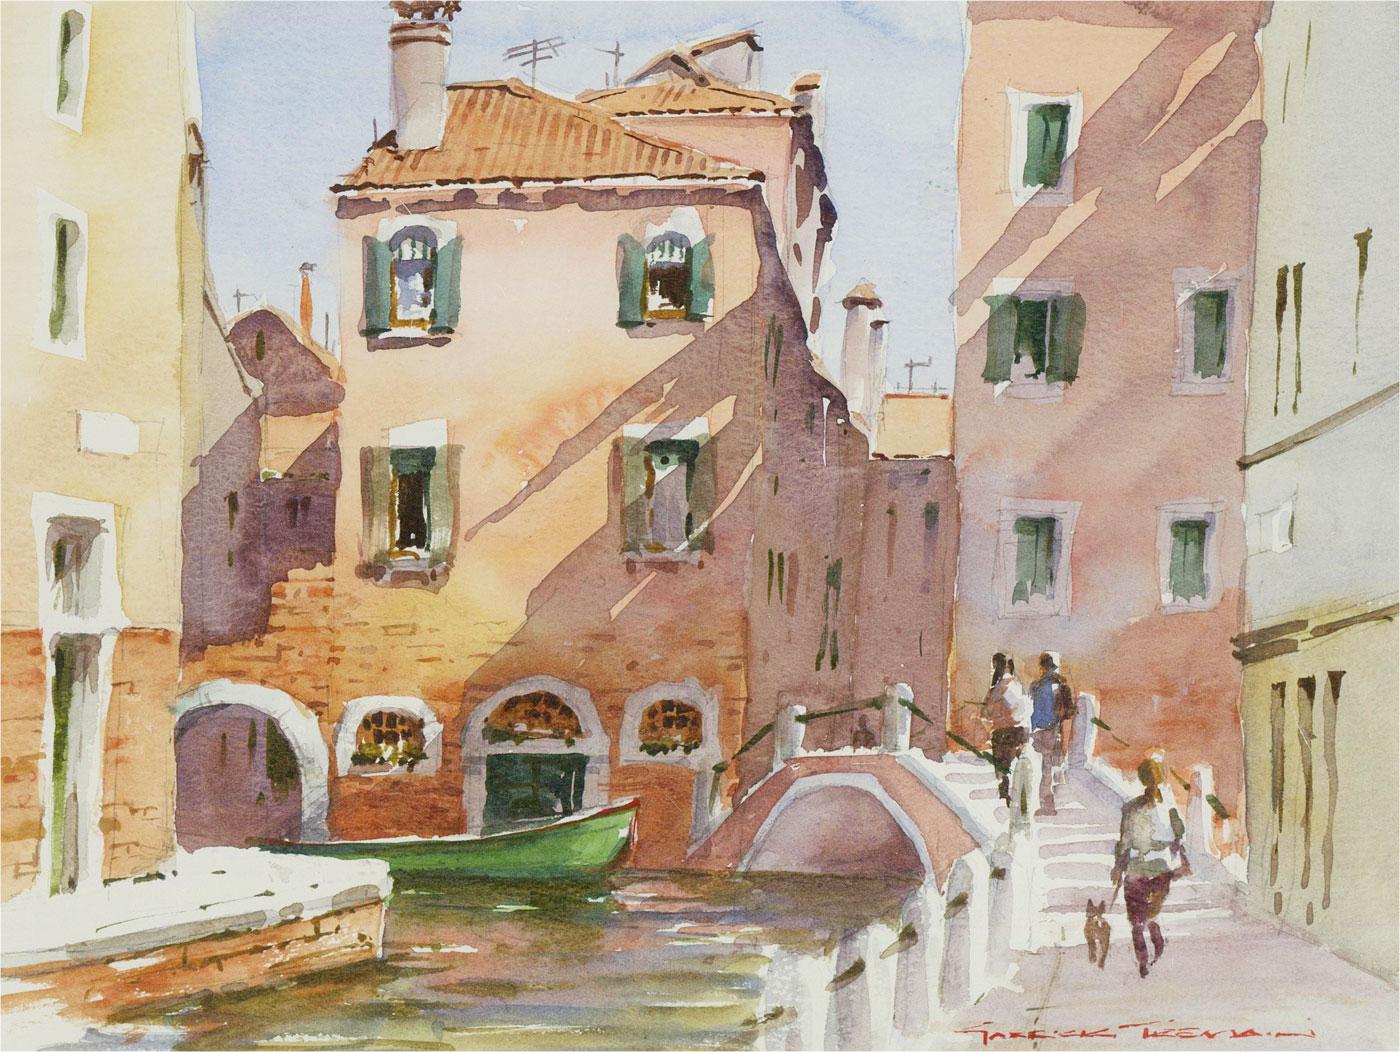 A charming watercolour scene of the bridges overlooking the canals of Venice. Signed to the lower right and well presented in a double card mount and sleek frame. On wove.

